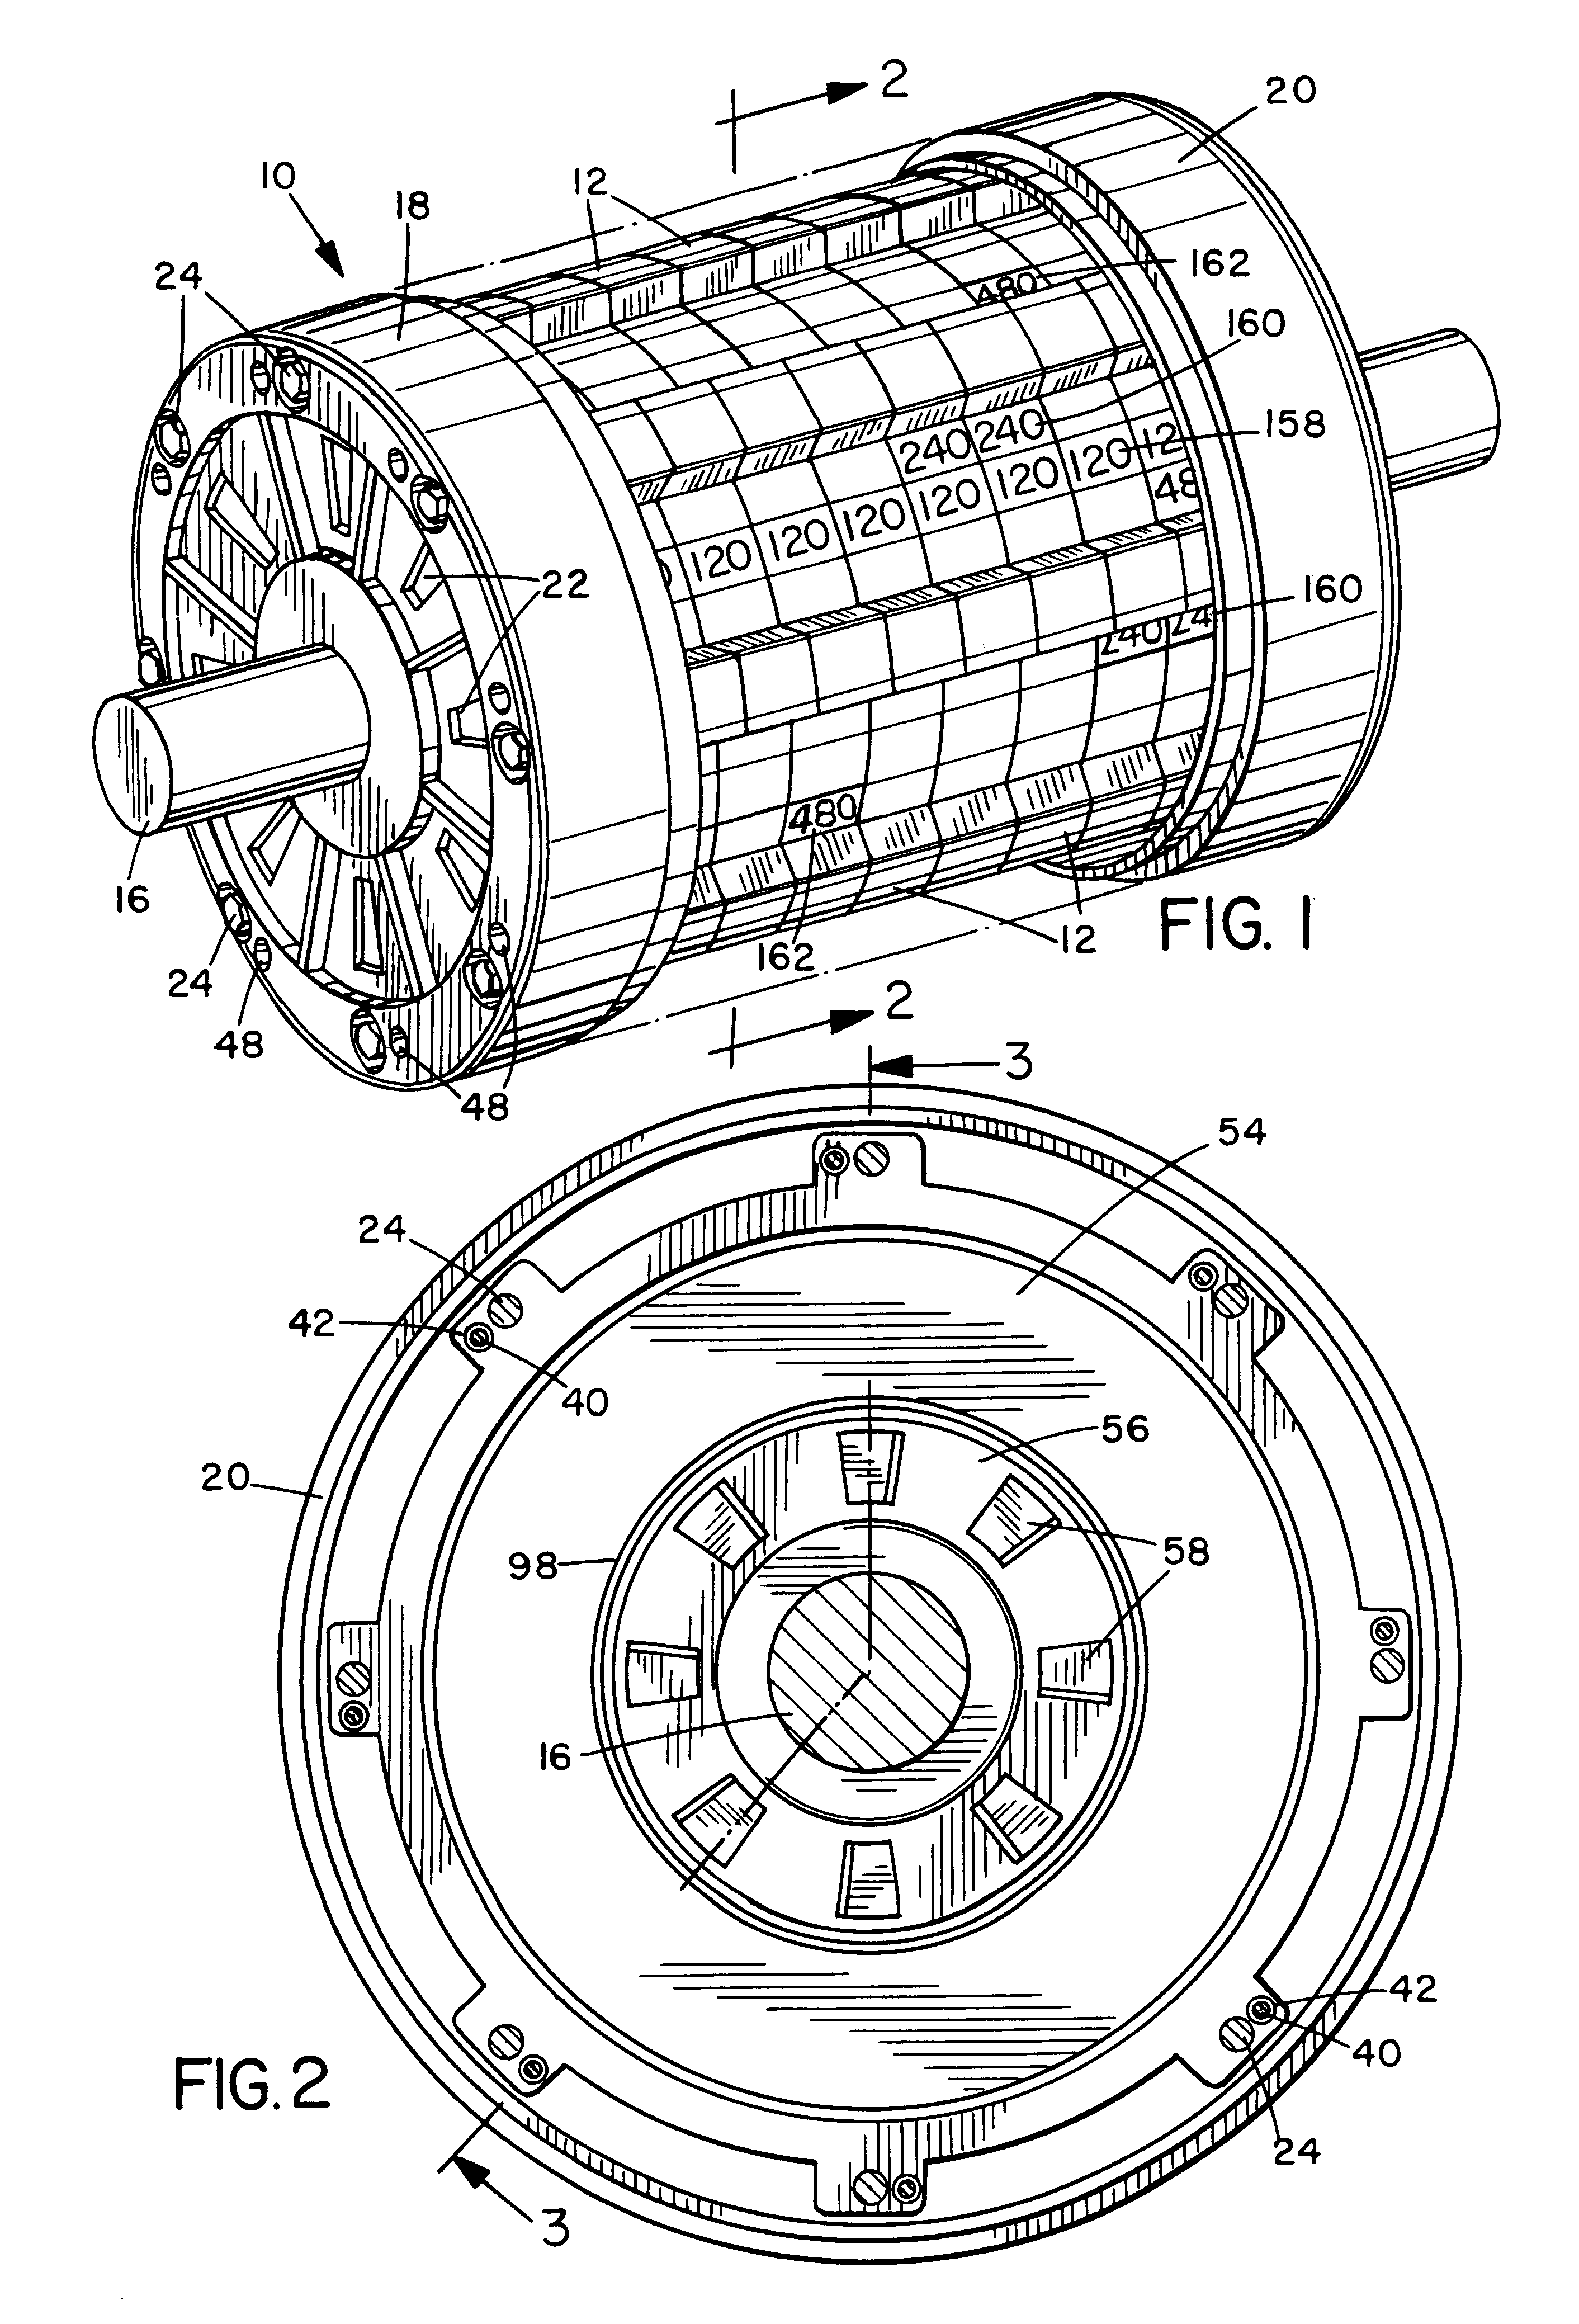 Method for selectively coupling layers of a stator in a motor/generator